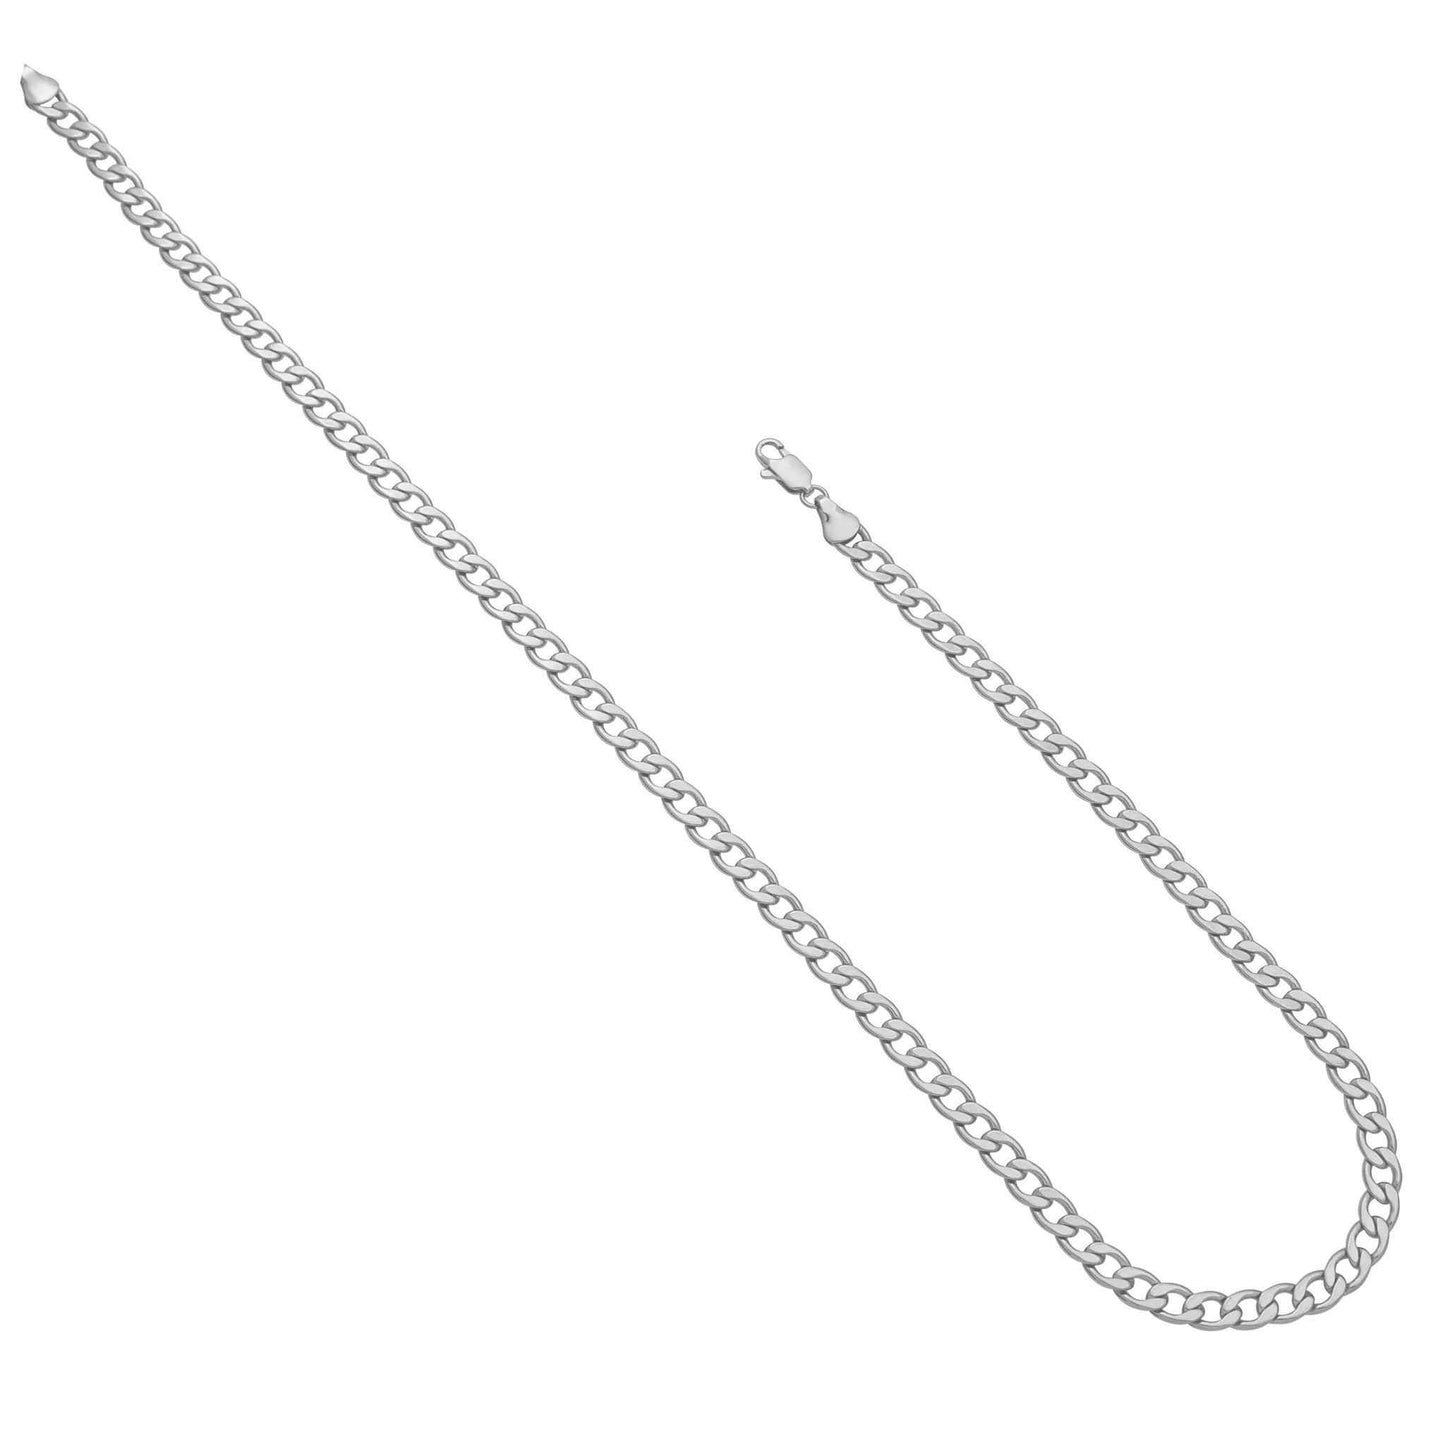 A 18" 5.5mm smooth curb chain displayed on a neutral white background.